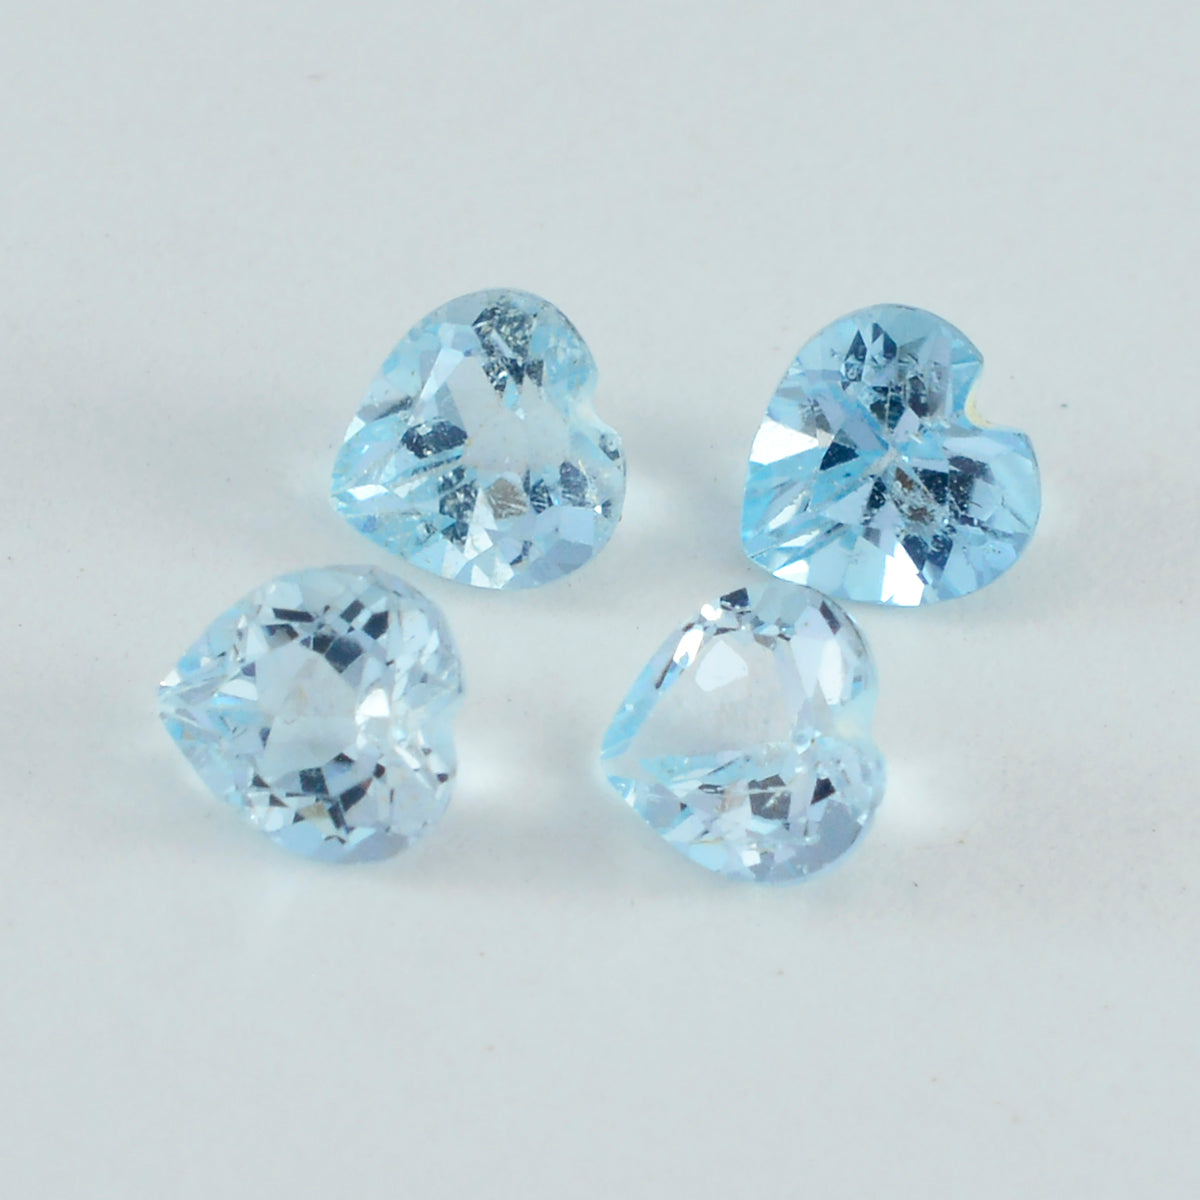 Riyogems 1PC Real Blue Topaz Faceted 6x6 mm Heart Shape lovely Quality Stone